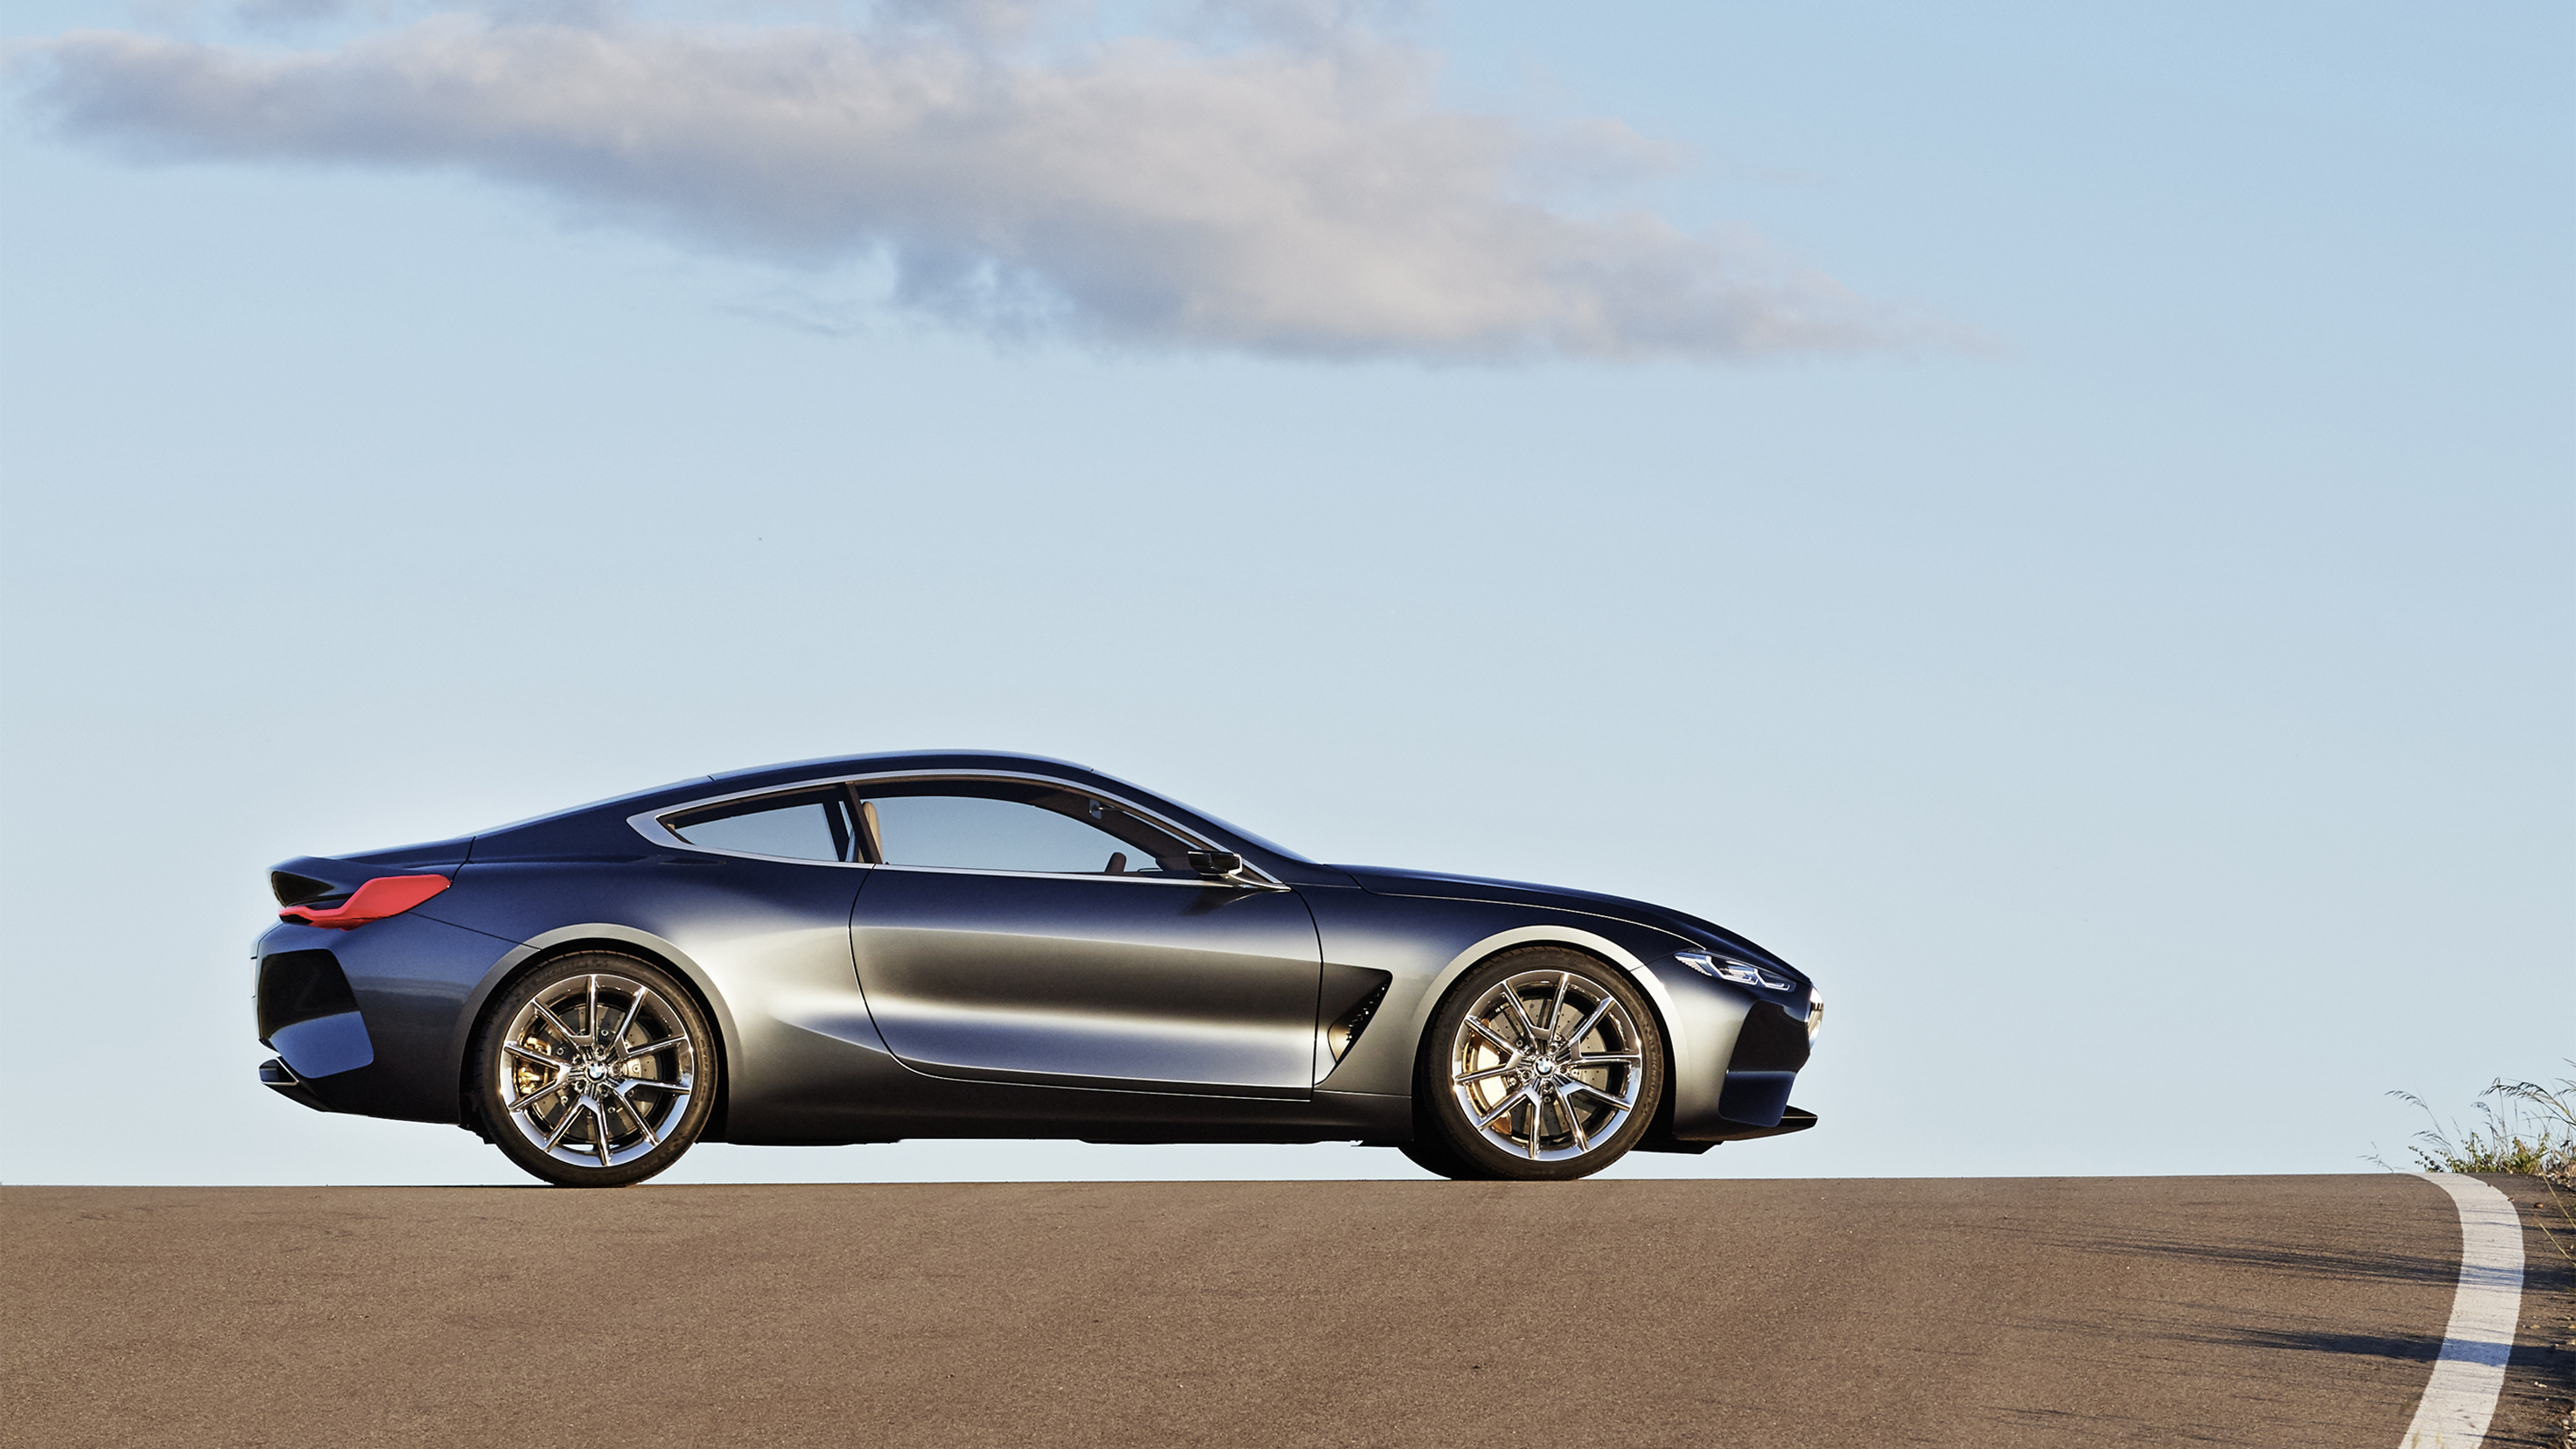 BMW Concept 8 Series HD Wallpaper by Christian Kain